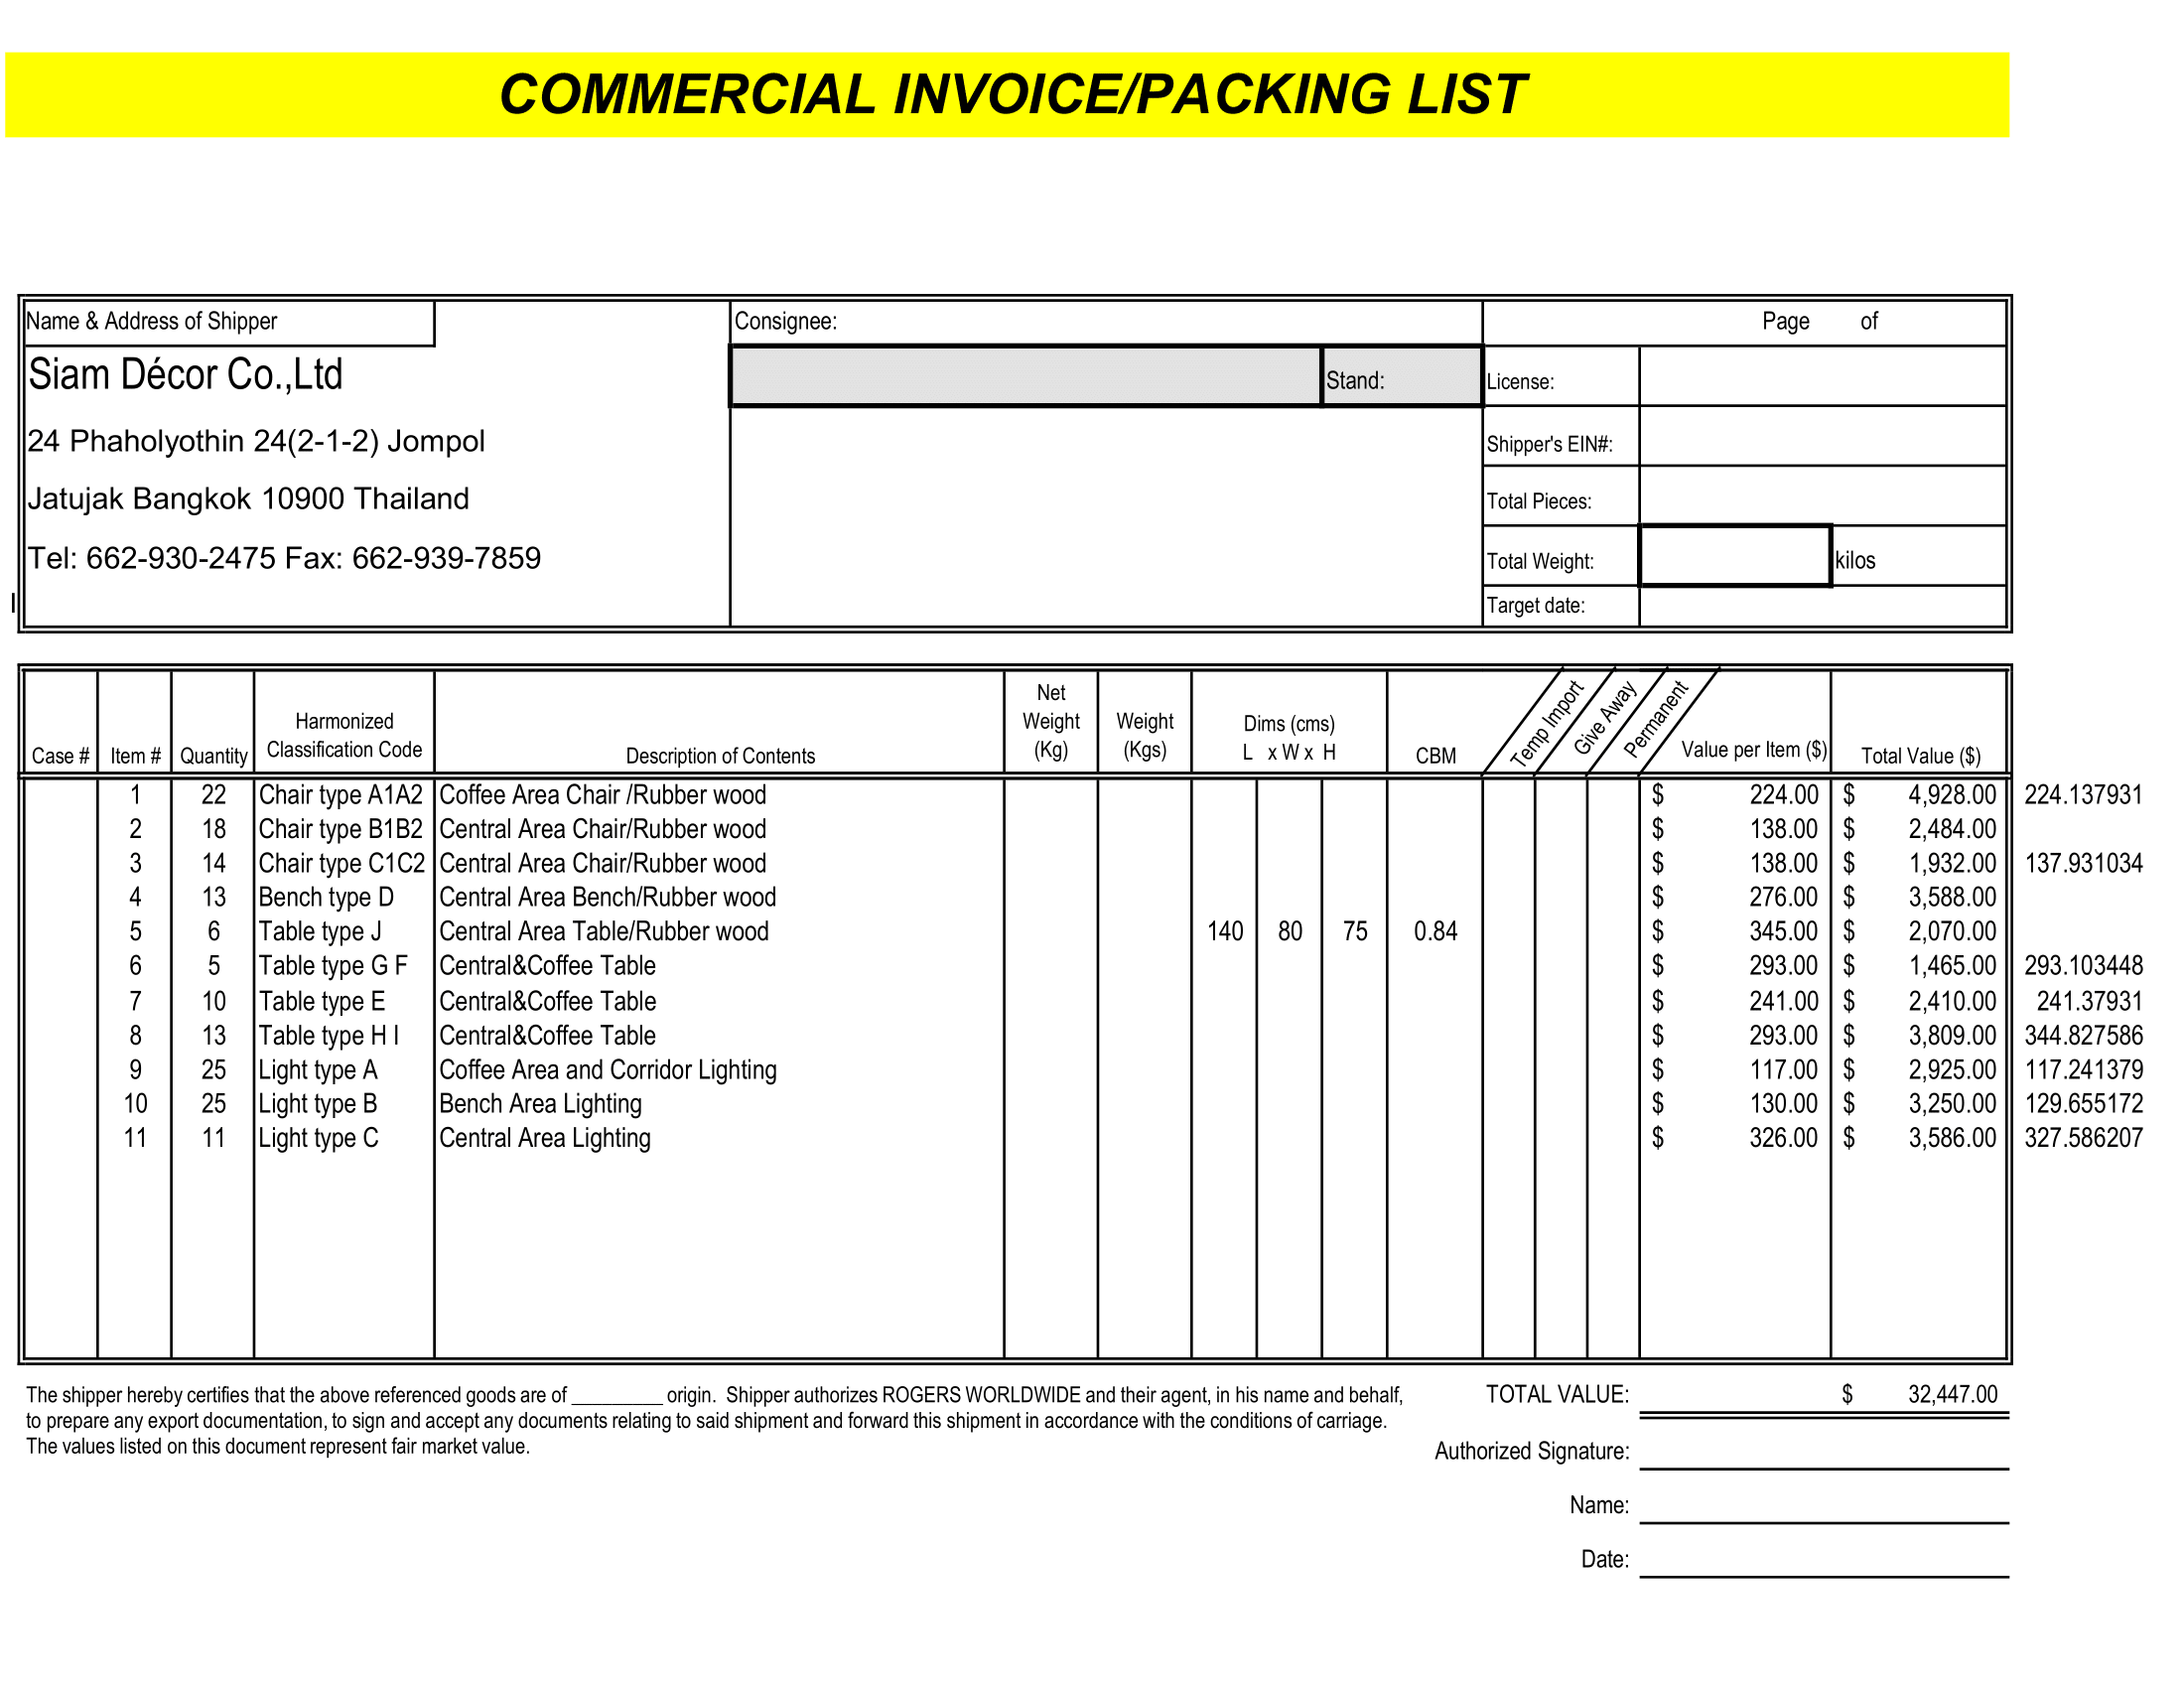 Commercial Invoice with Packaging list